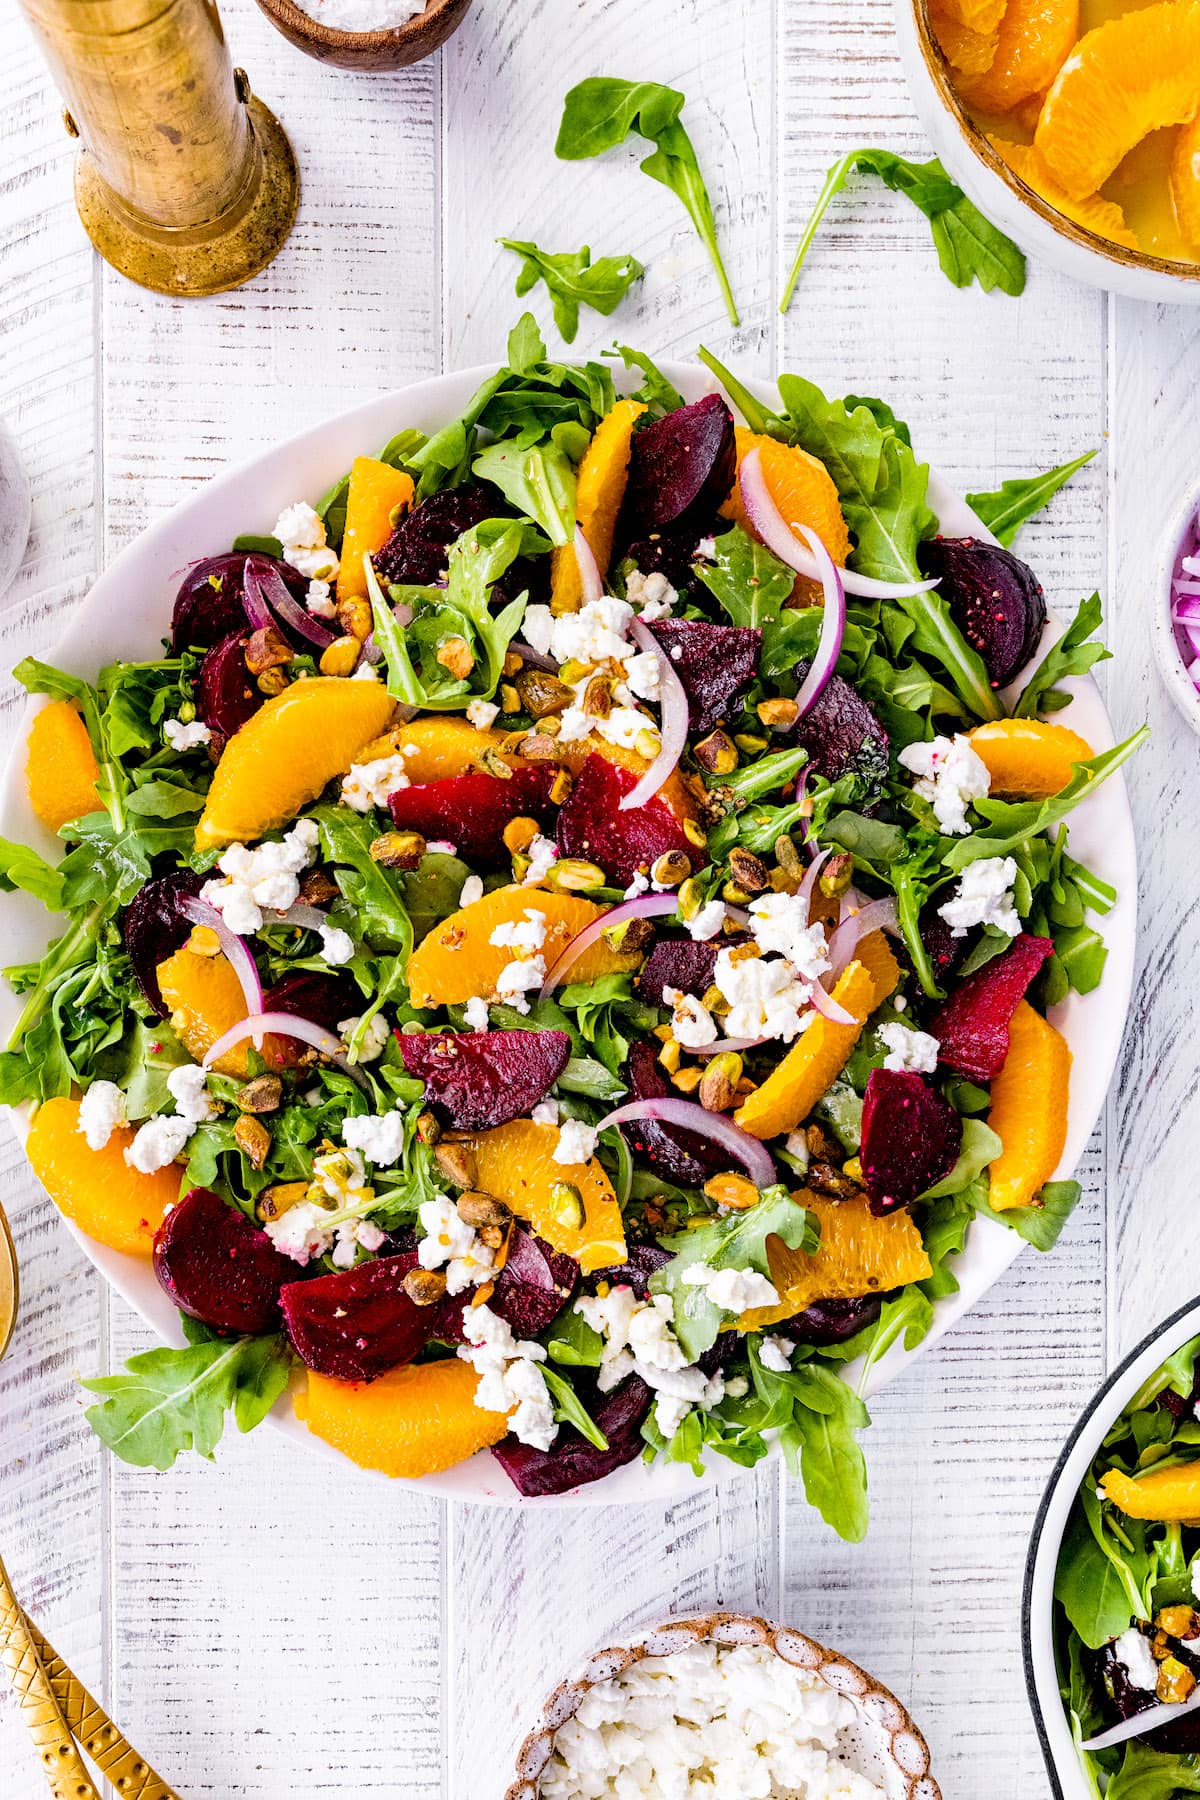 arugula in bowl with roasted beets, orange slices, red onion, goat cheese, and pistachios.